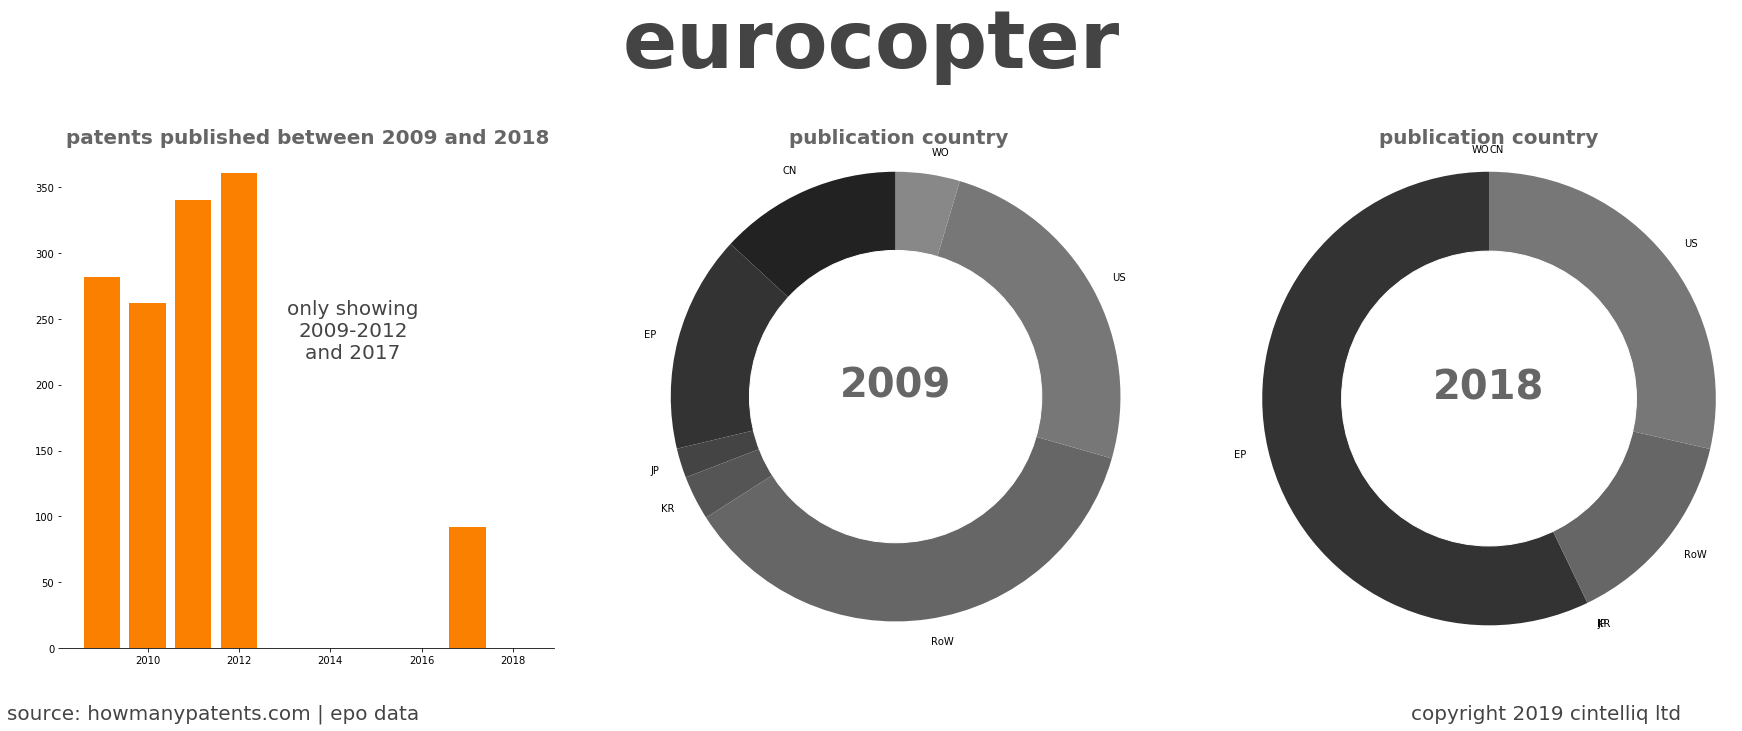 summary of patents for Eurocopter